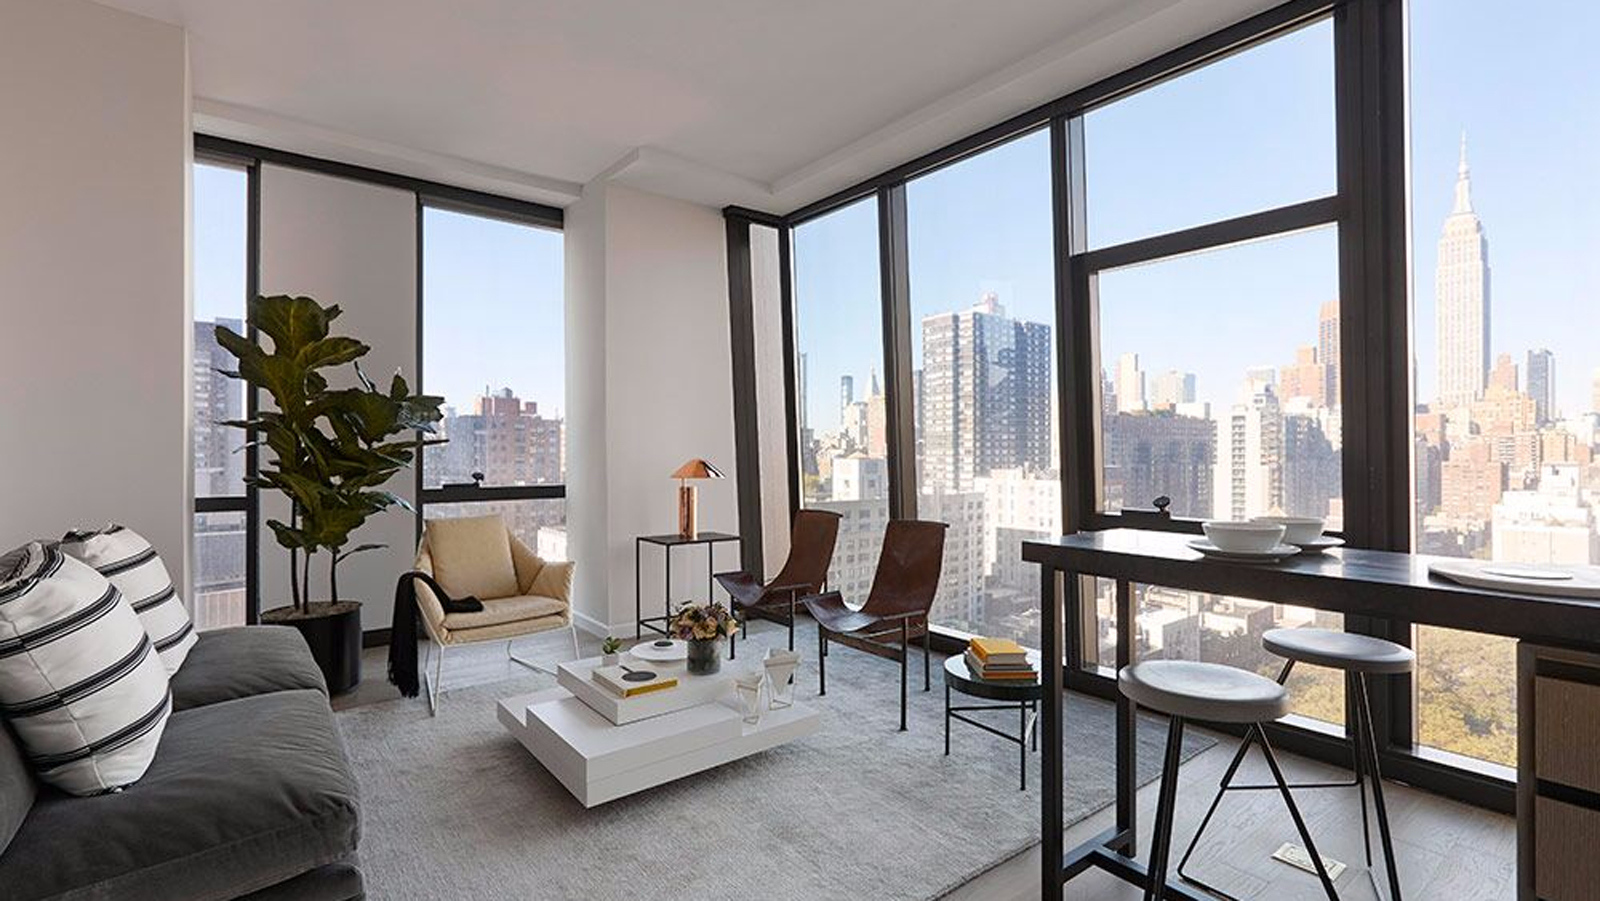 American Copper Buildings, 626 First Avenue, NYC - Rental Apartments |  CityRealty